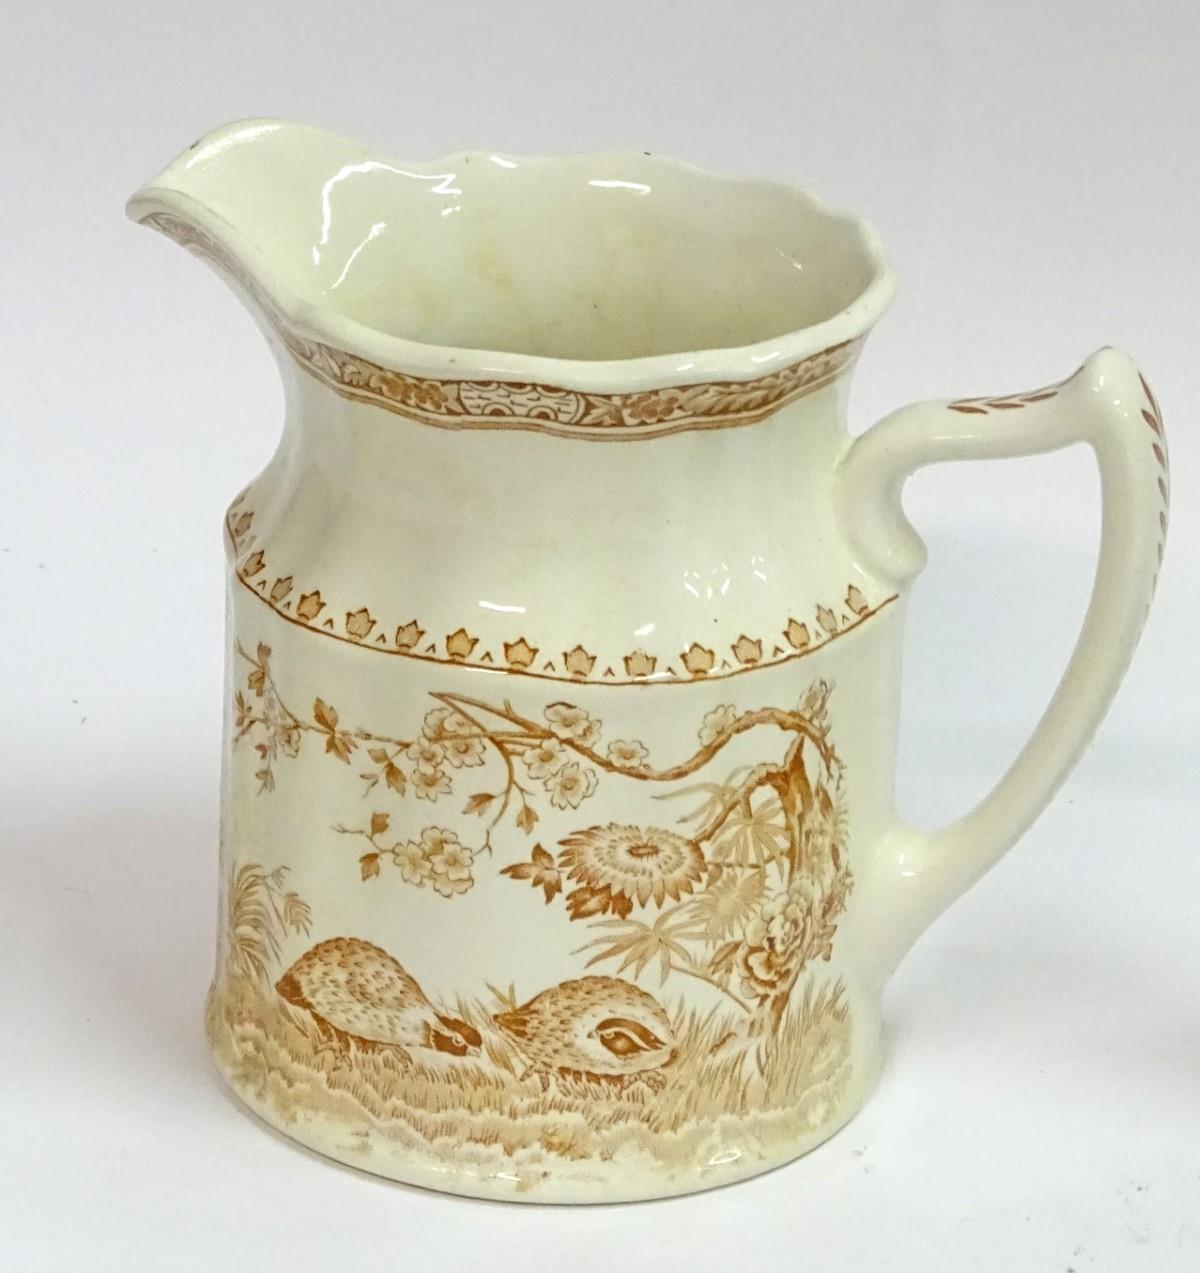 A quantity of Furnivals tea wares decorated in the 'Quail' pattern, to include 4 cups, 6 saucers, - Image 9 of 9